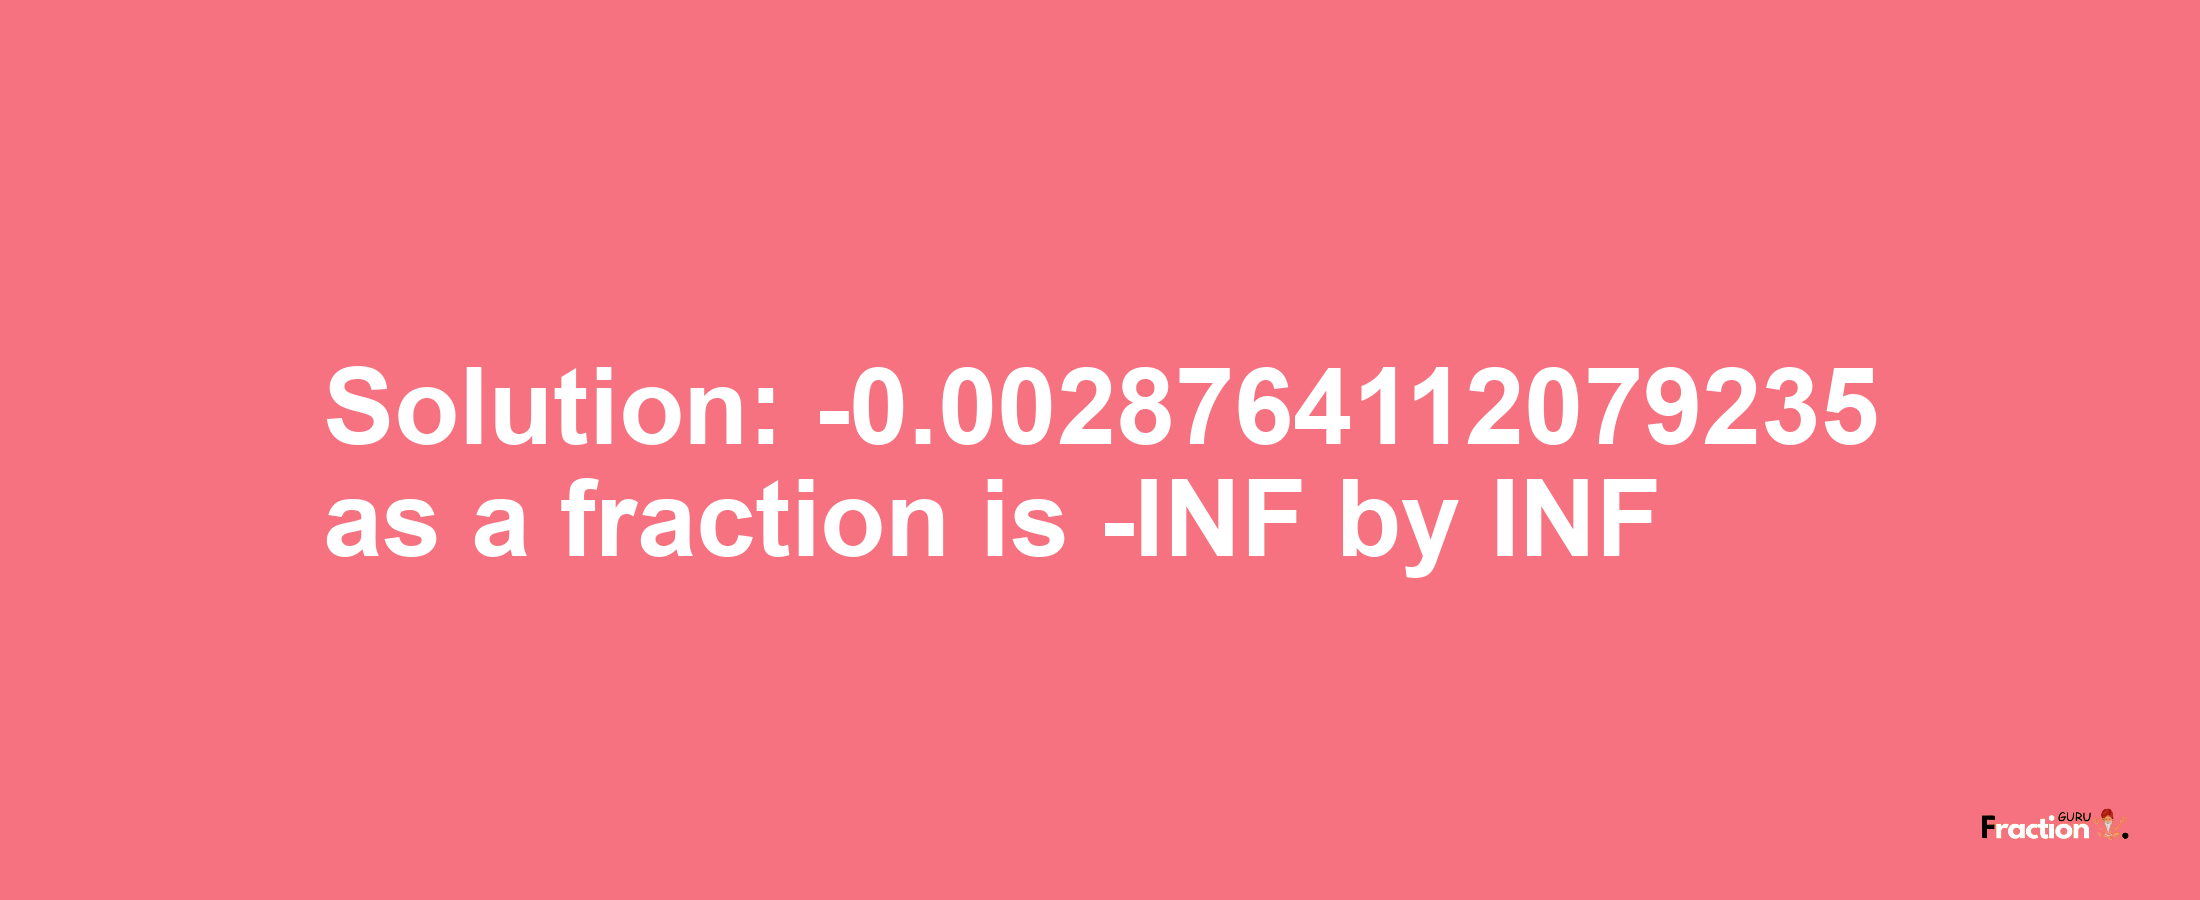 Solution:-0.0028764112079235 as a fraction is -INF/INF